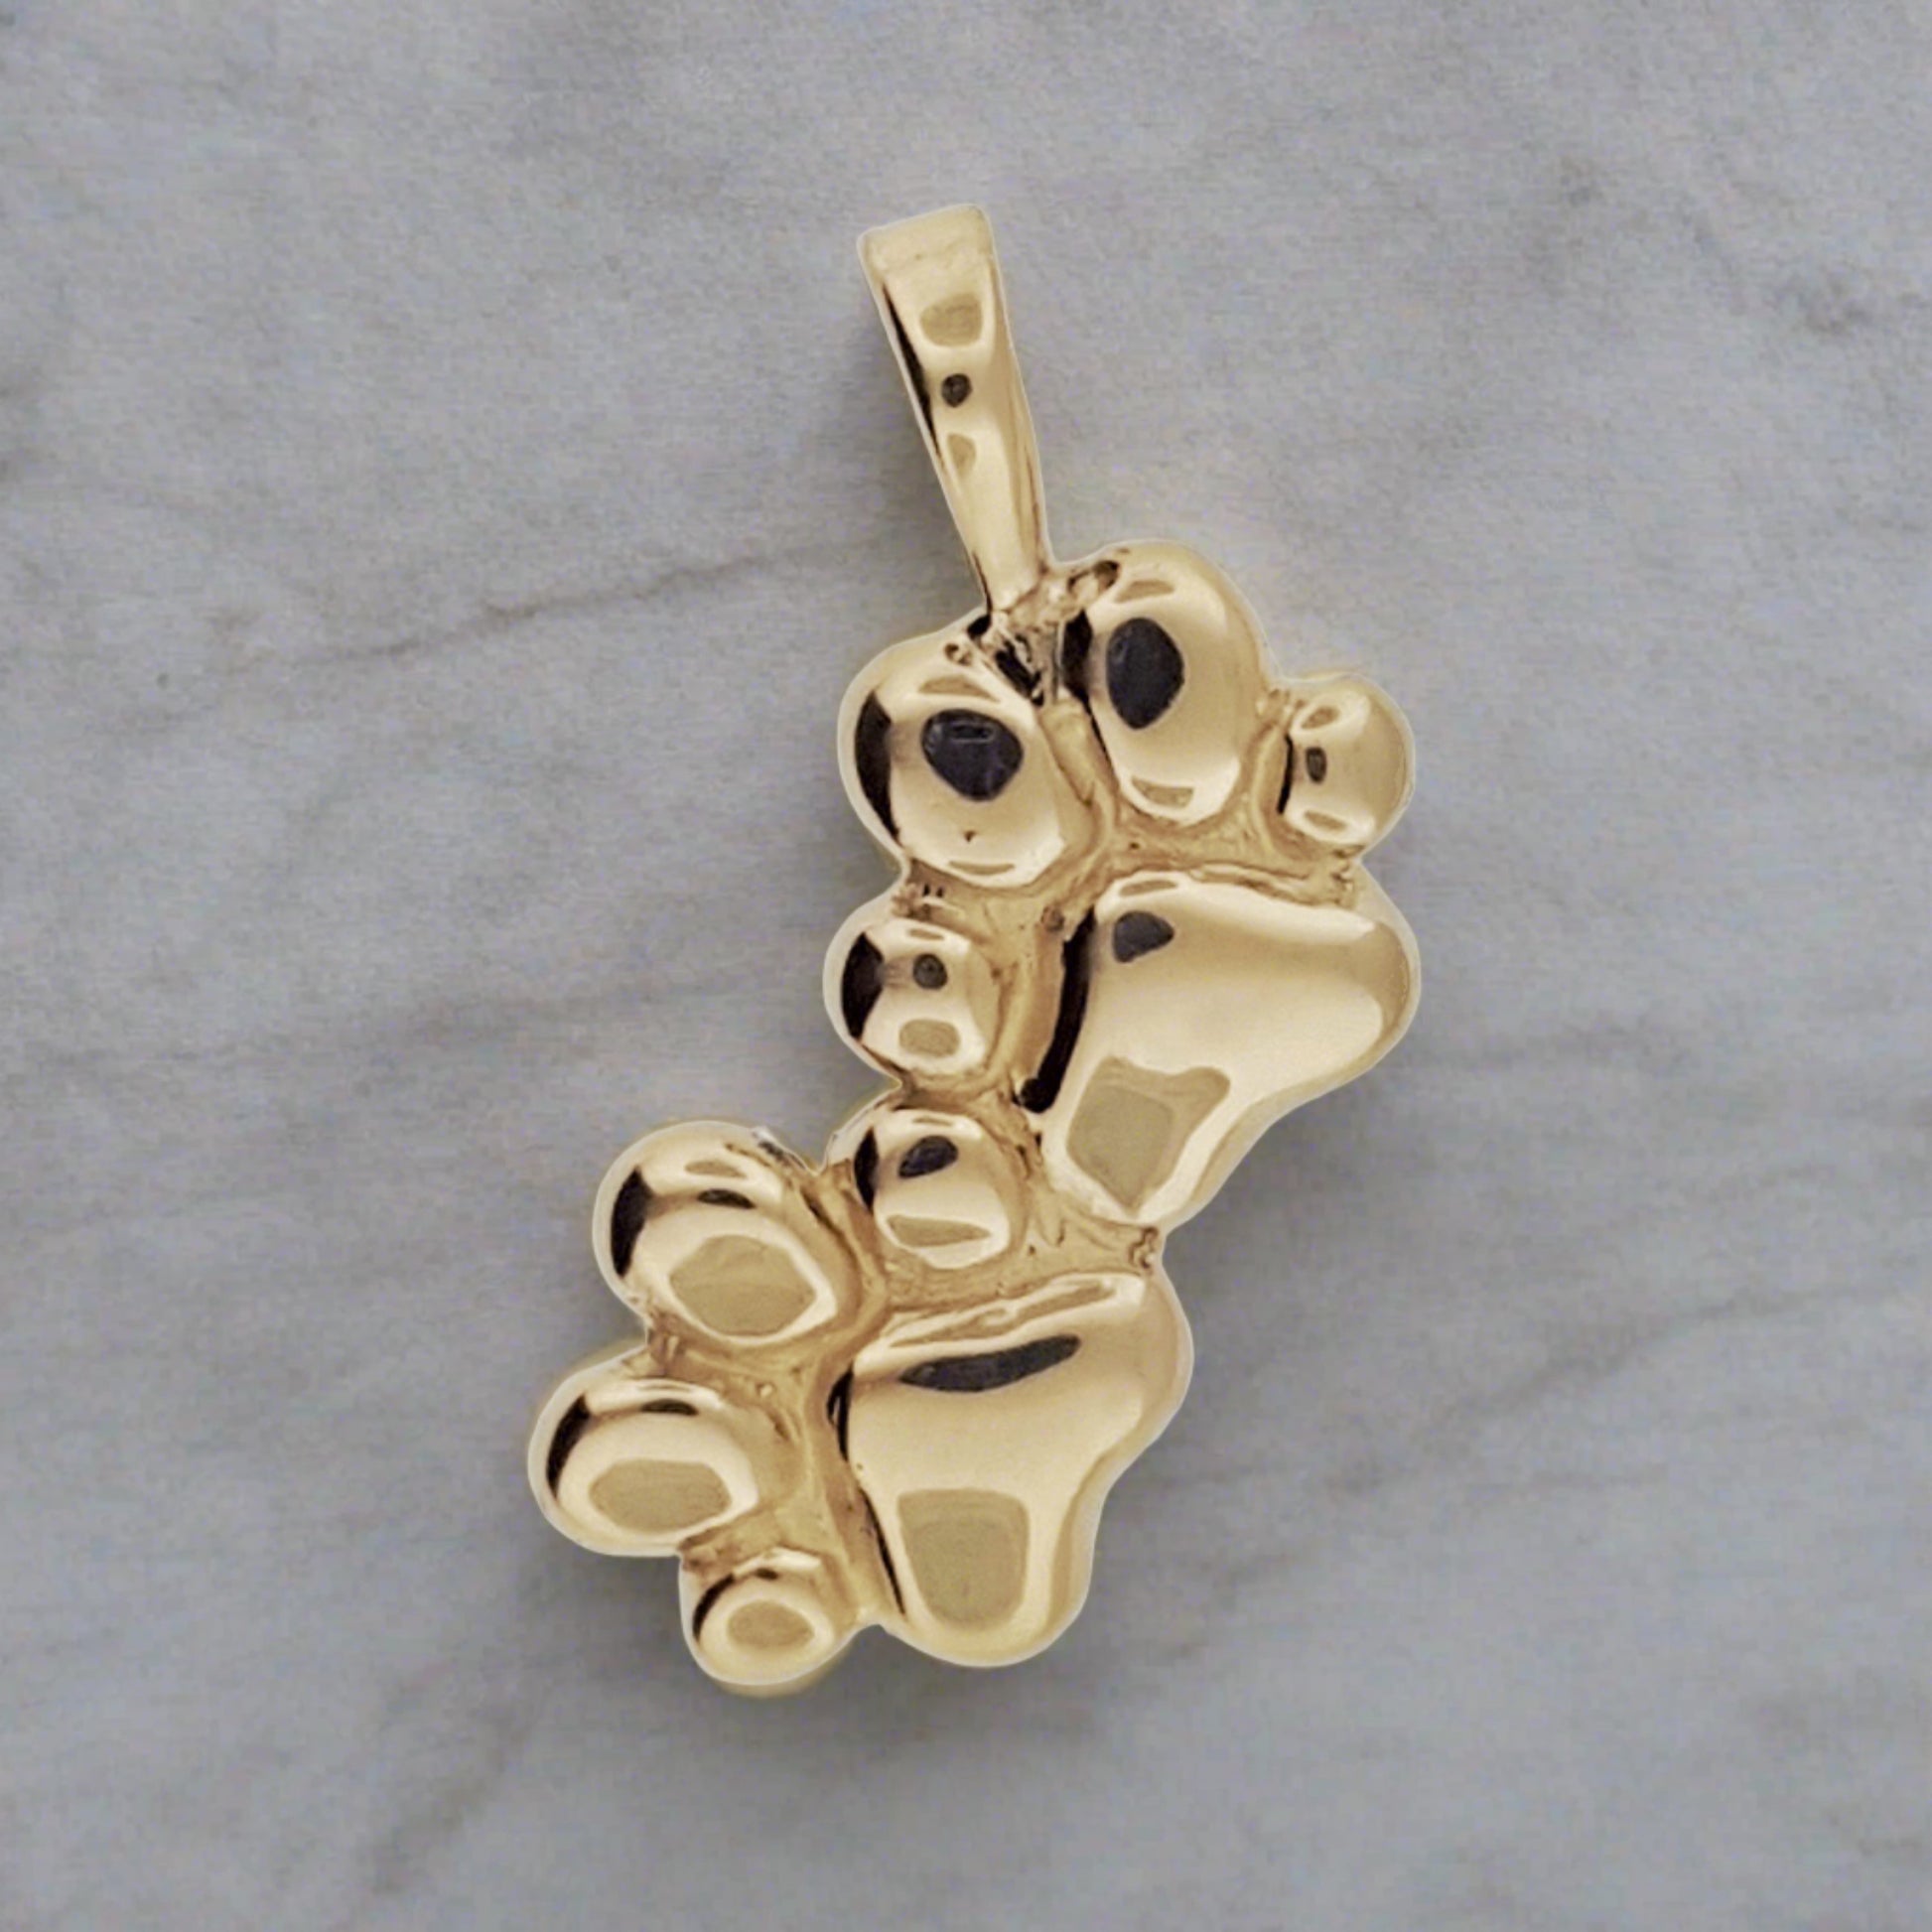 Small Paw Print Charm Pendant in Gold, Dog Paw Charm Pendant, Cat Paw Charm Pendant, Paw Print Charm Necklace, Gift For Pet Owners, Gold Cat Paw Pendant, Gold Dog Paw Pendant, Gold Paw Print Pendant, Gold Toe Beans Pendant, Gold Paw Print Charm